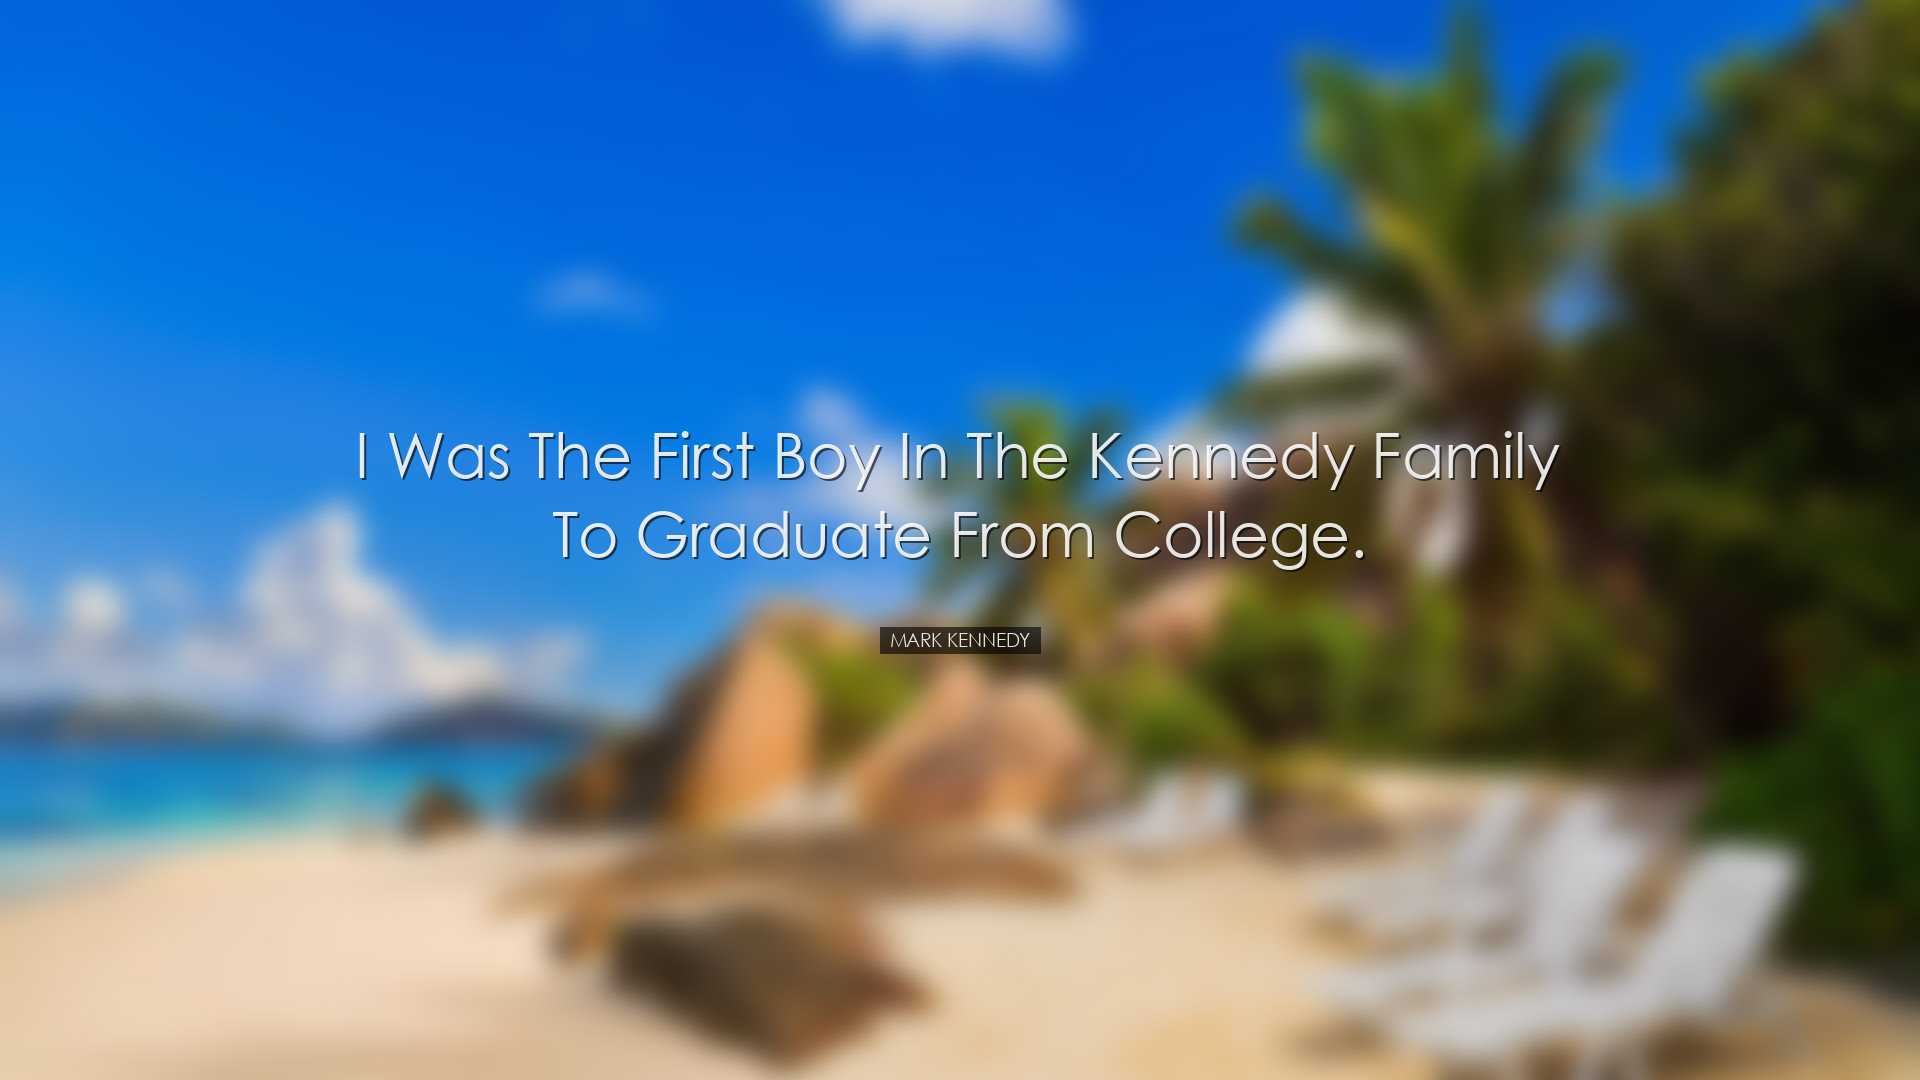 I was the first boy in the Kennedy family to graduate from college